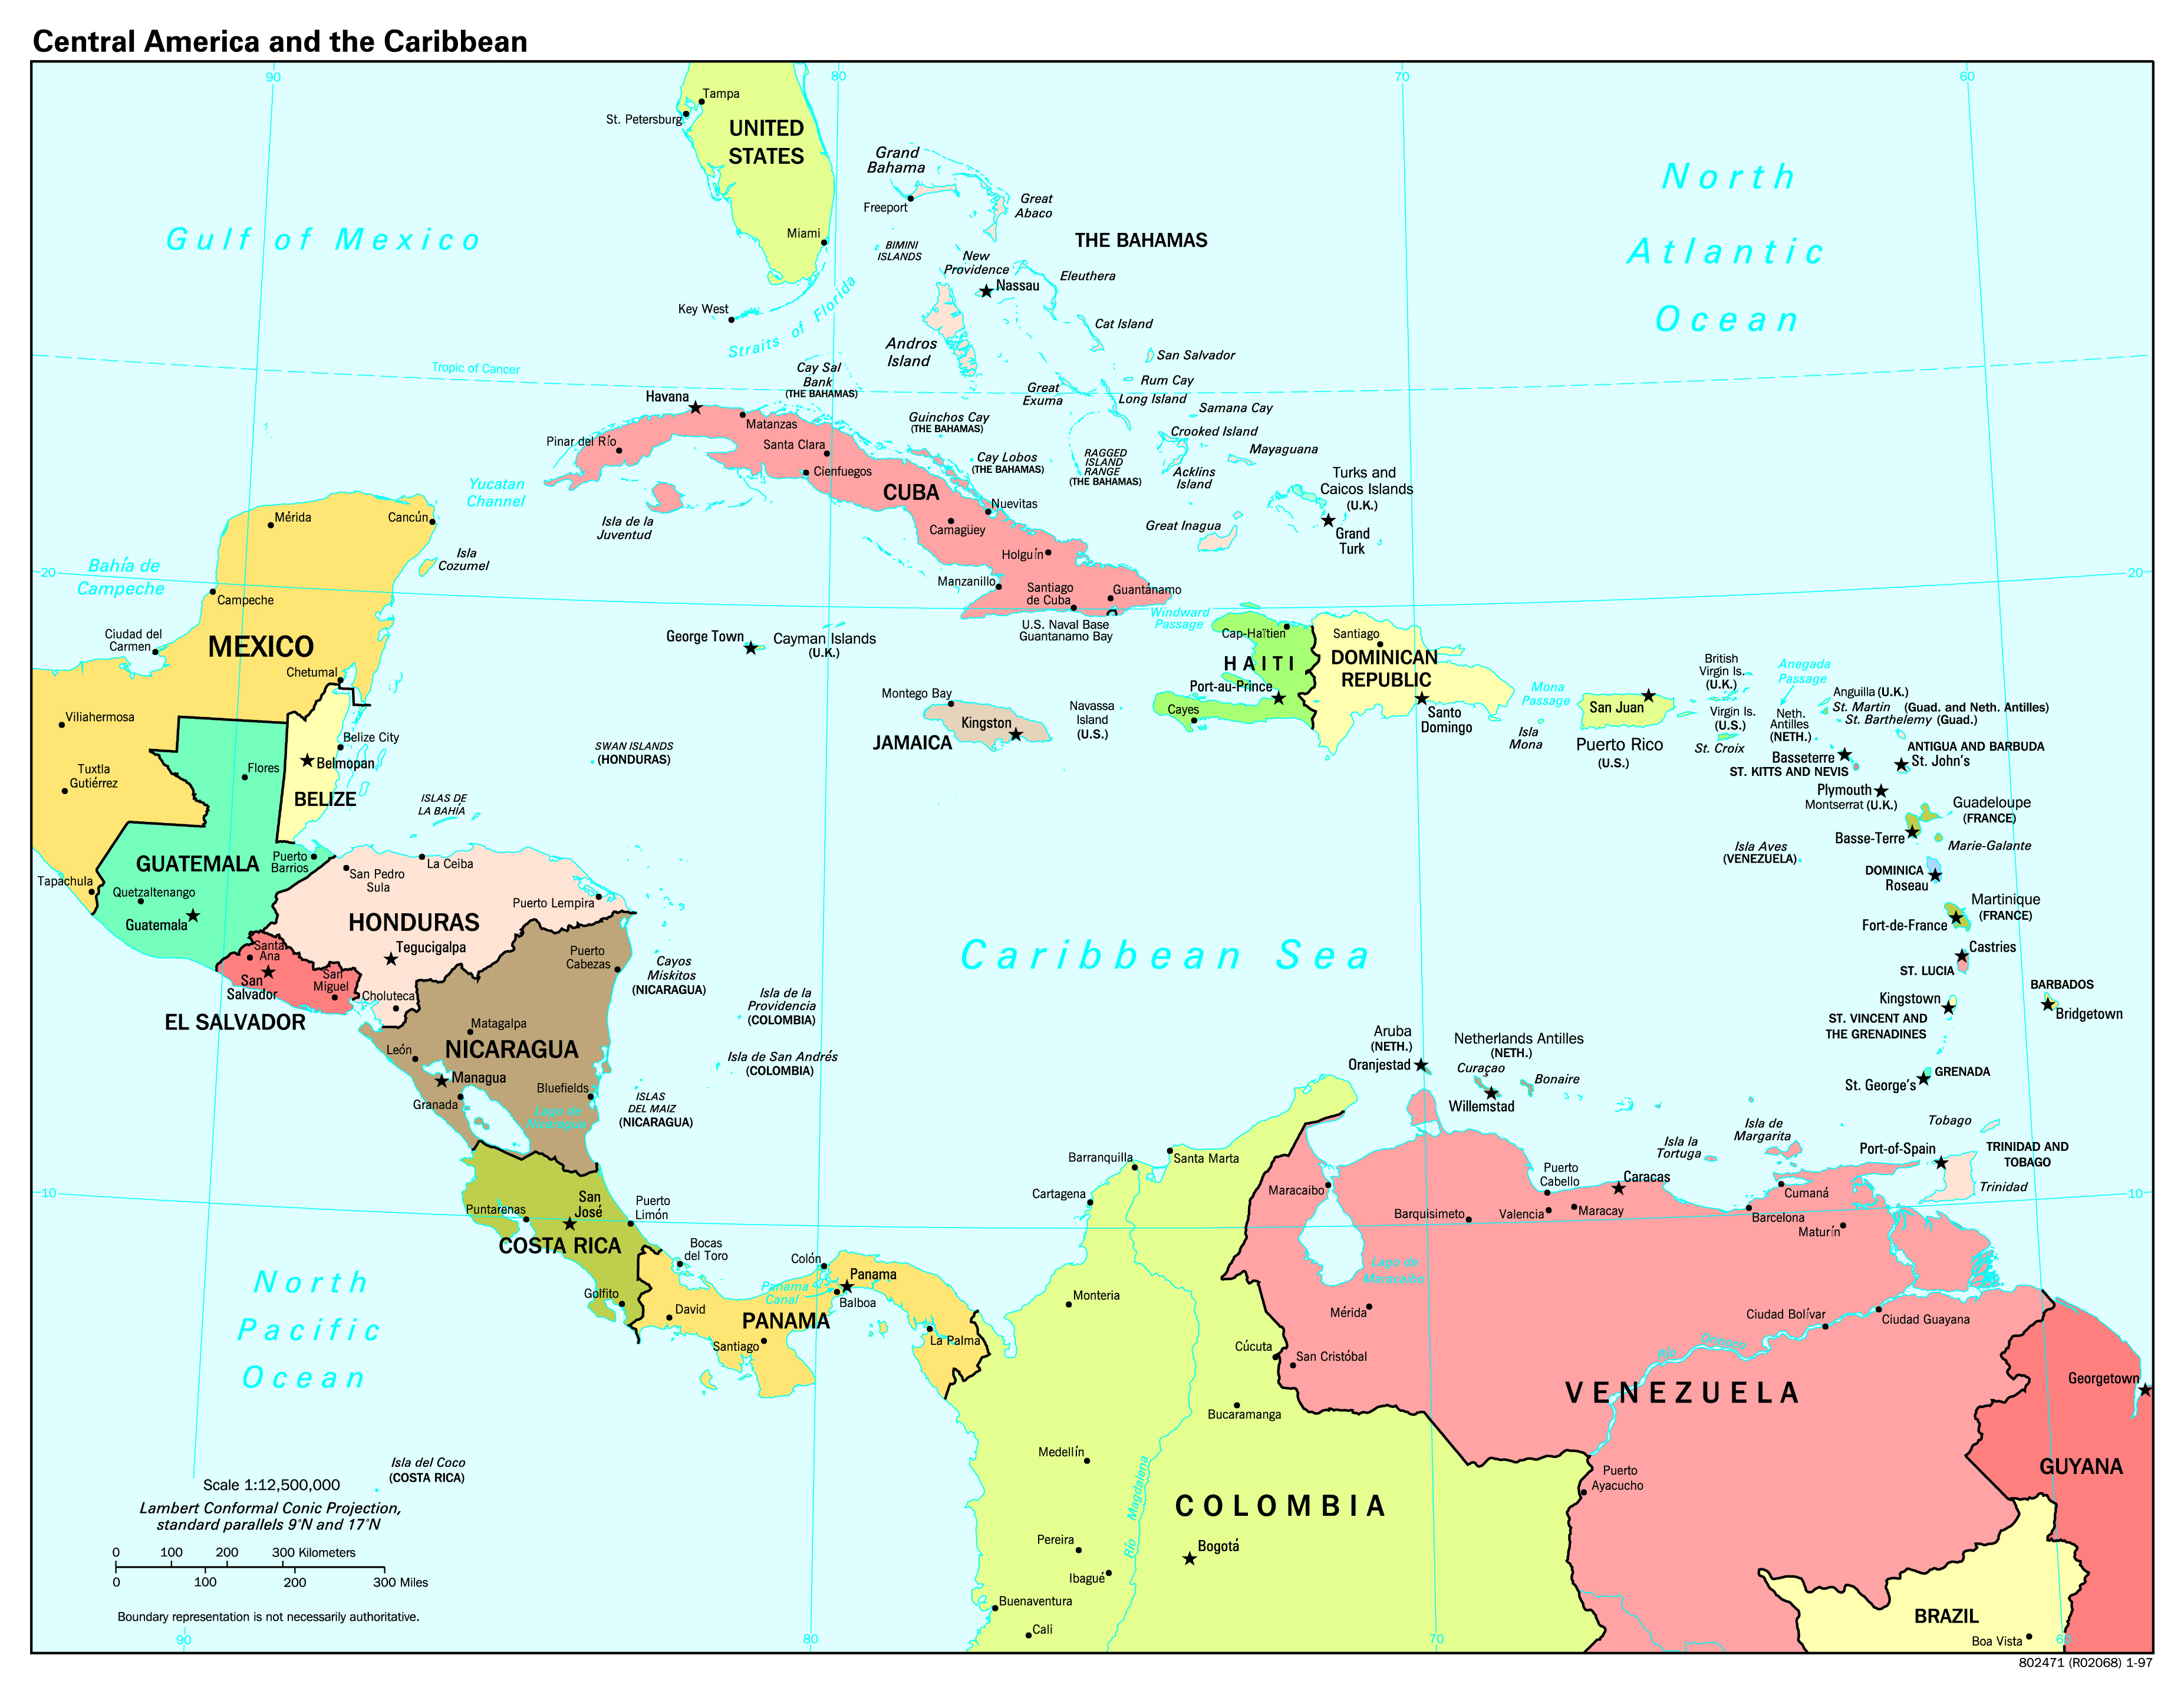 large-scale-political-map-of-central-america-and-the-caribbean-with-capitals-1997-vidiani